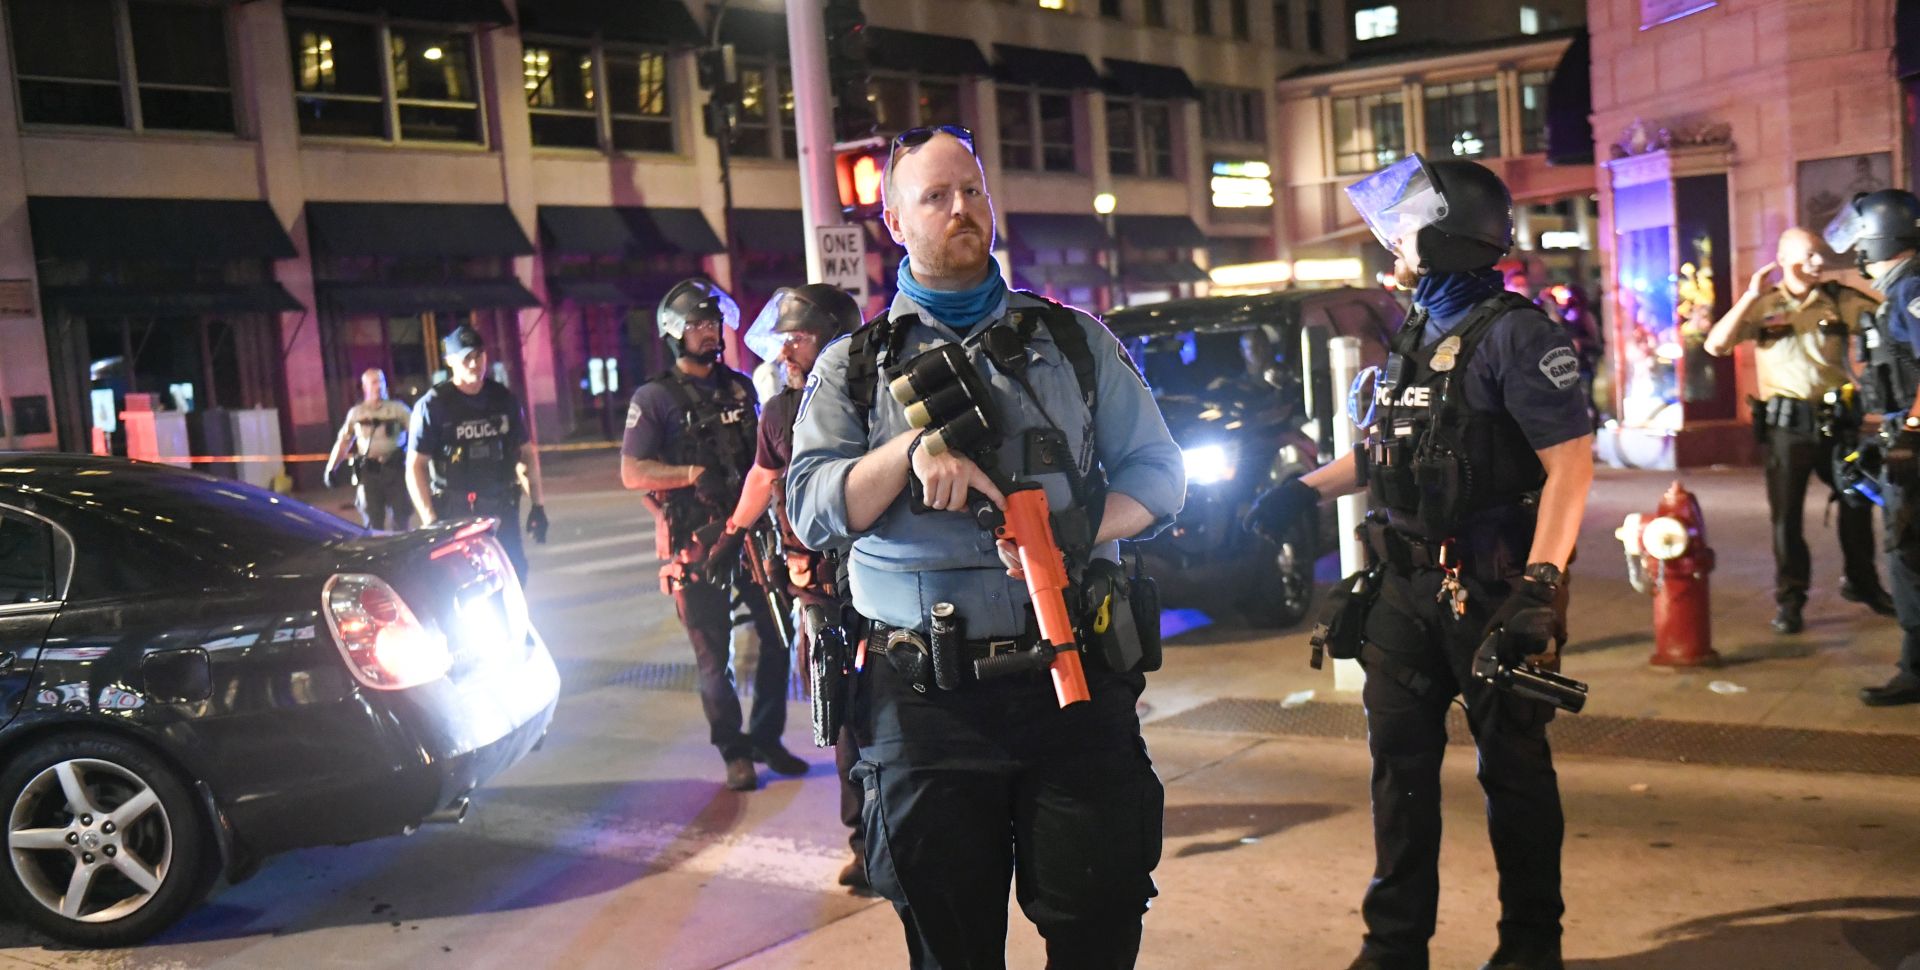 epa08628102 Police officers stand guard as protesters and rioters clash with police after a homicide suspect killed himself as police closed in on him in downtown Minneapolis, Minnesota, USA, 26 August 2020. Rumors swirled that police shot and killed the Black man but nearby security video confirmed the suicide.  EPA/CRAIG LASSIG